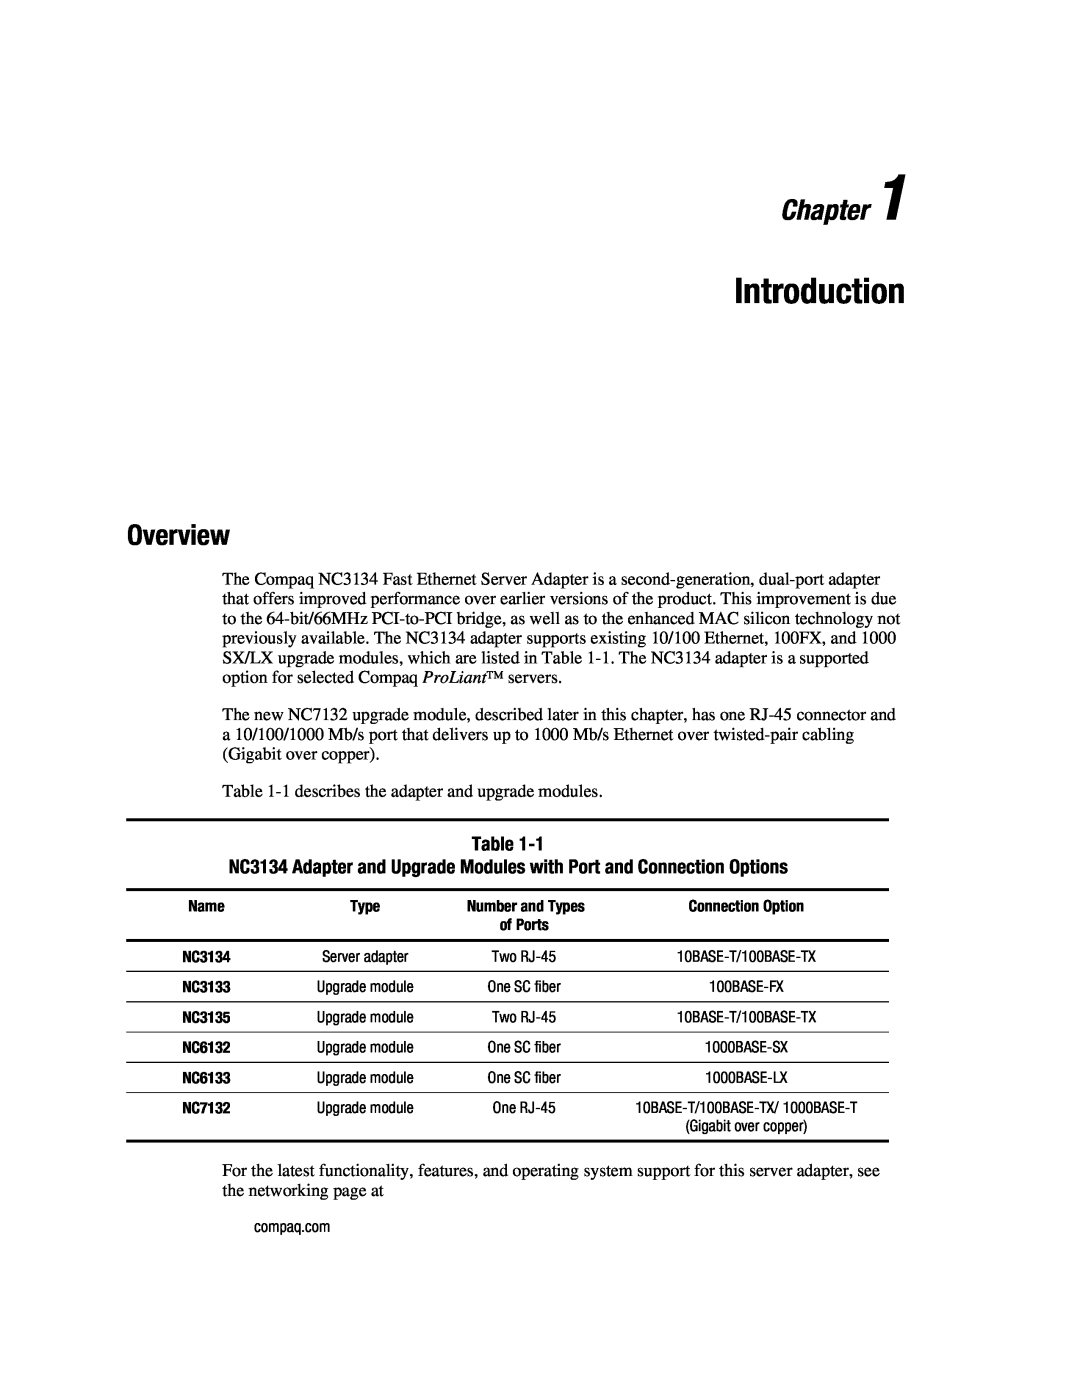 Compaq manual Introduction, Chapter, Overview, NC3134 Adapter and Upgrade Modules with Port and Connection Options 